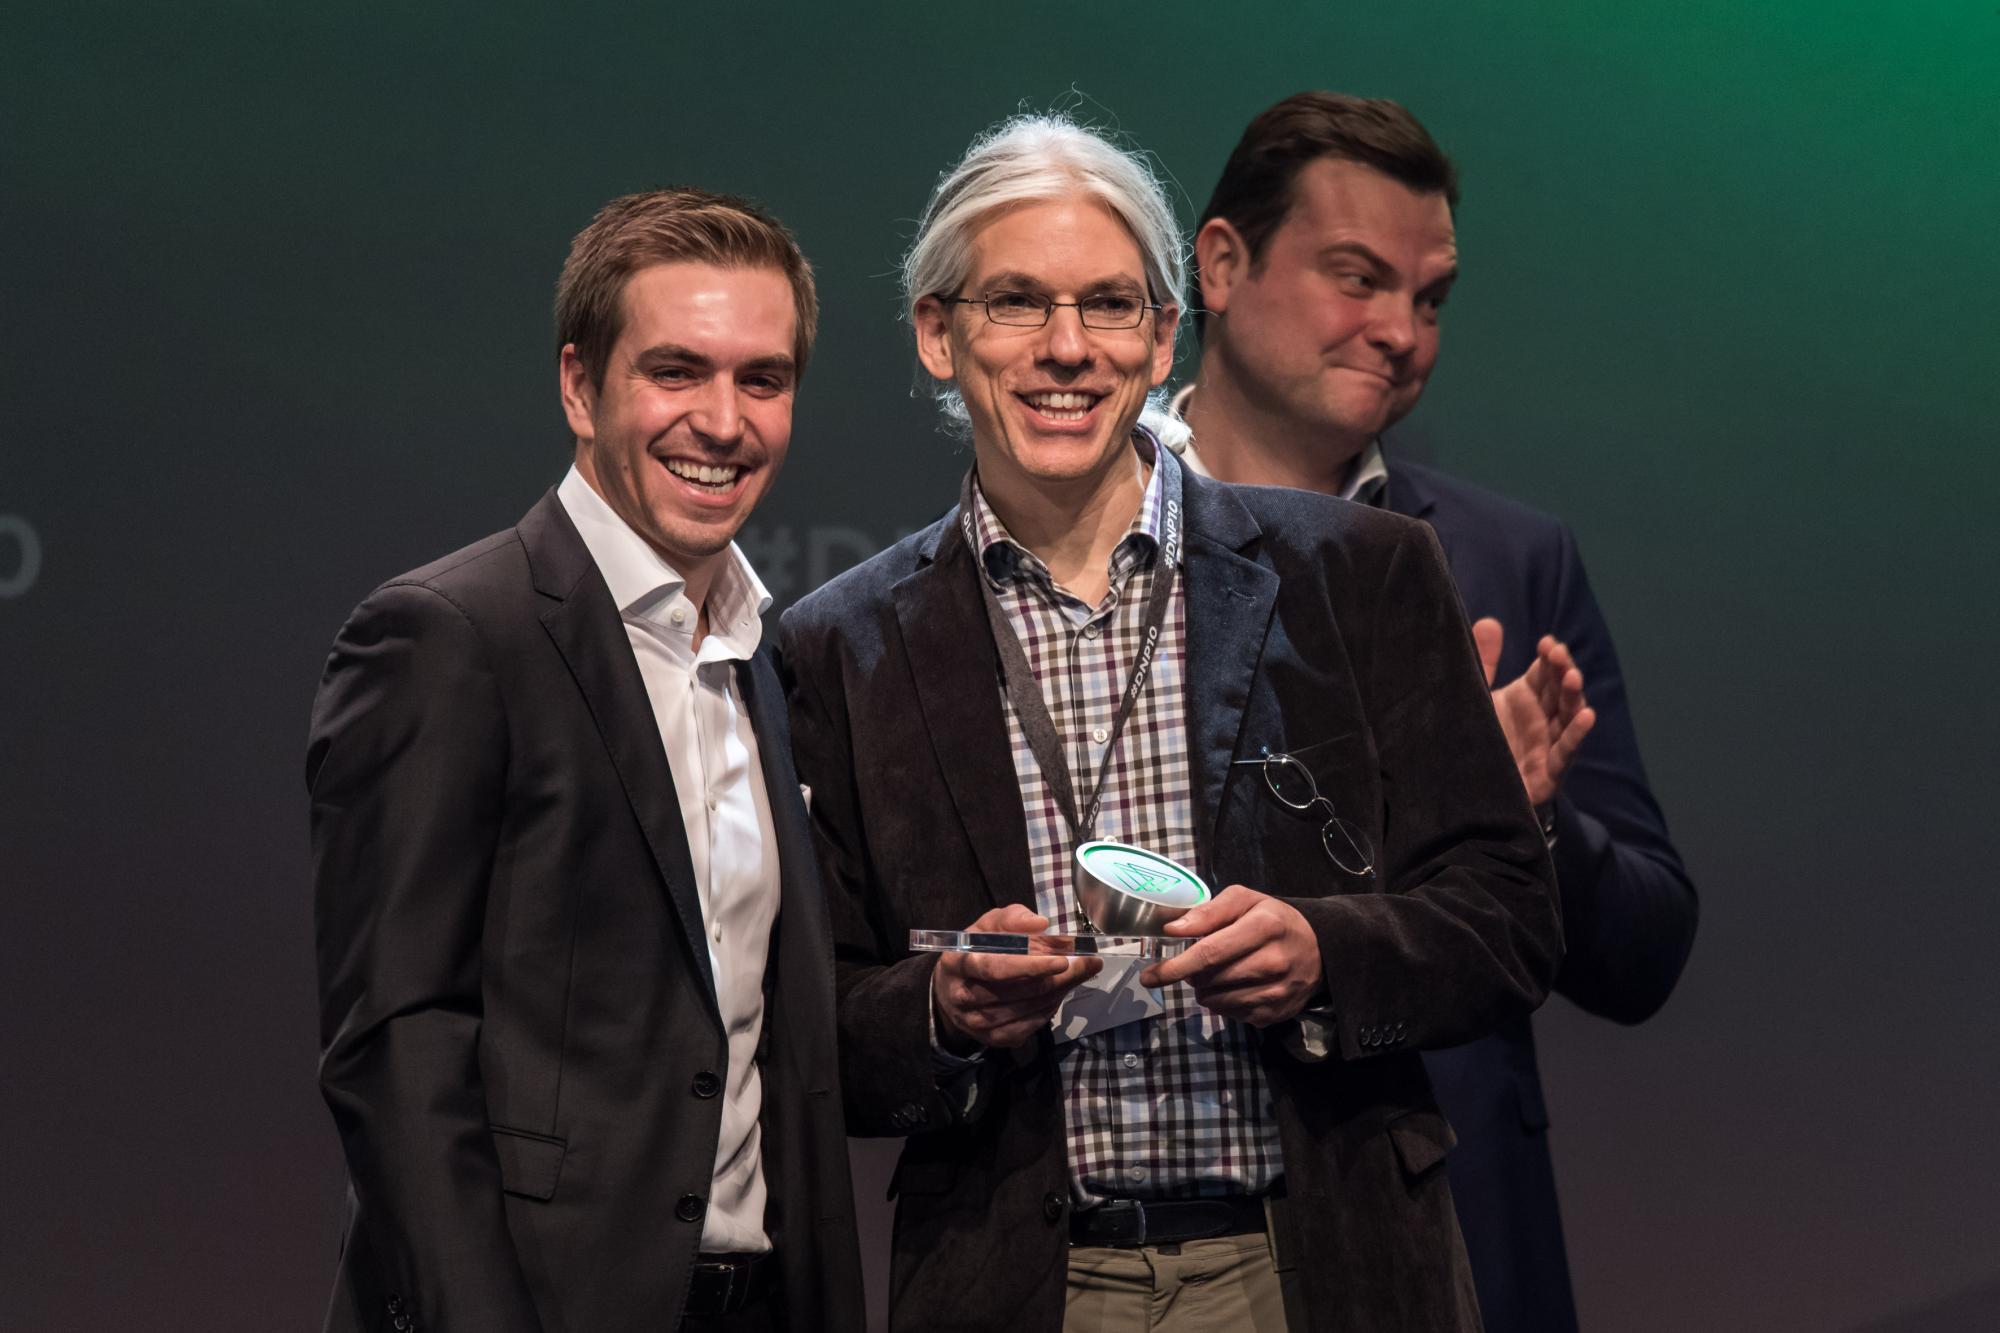 Martin Aufmuth and Philipp Lahm at the 2017 Sustainability Award ceremony